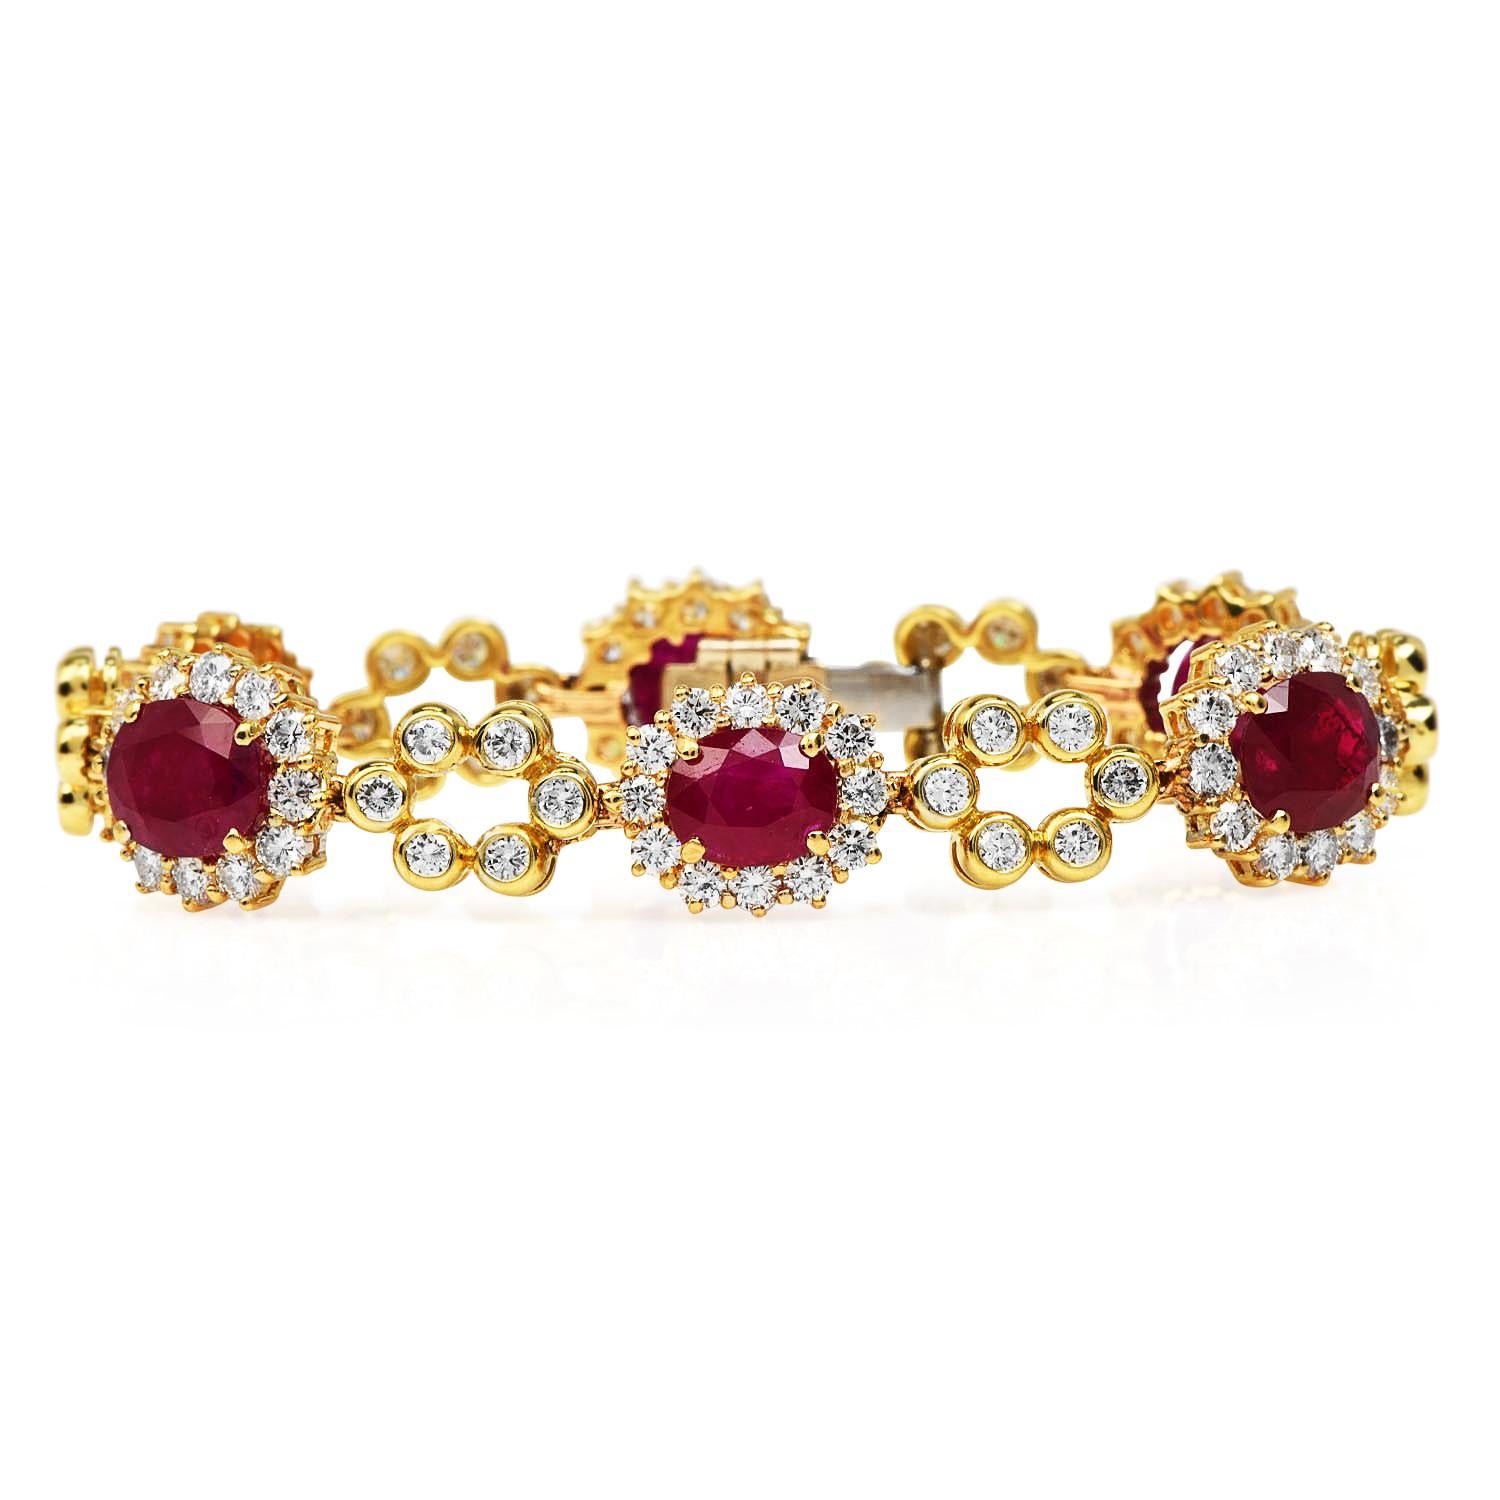 1980s Diamond Ruby 18K Yellow Gold Flower Halo Link Bracelet In Excellent Condition For Sale In Miami, FL